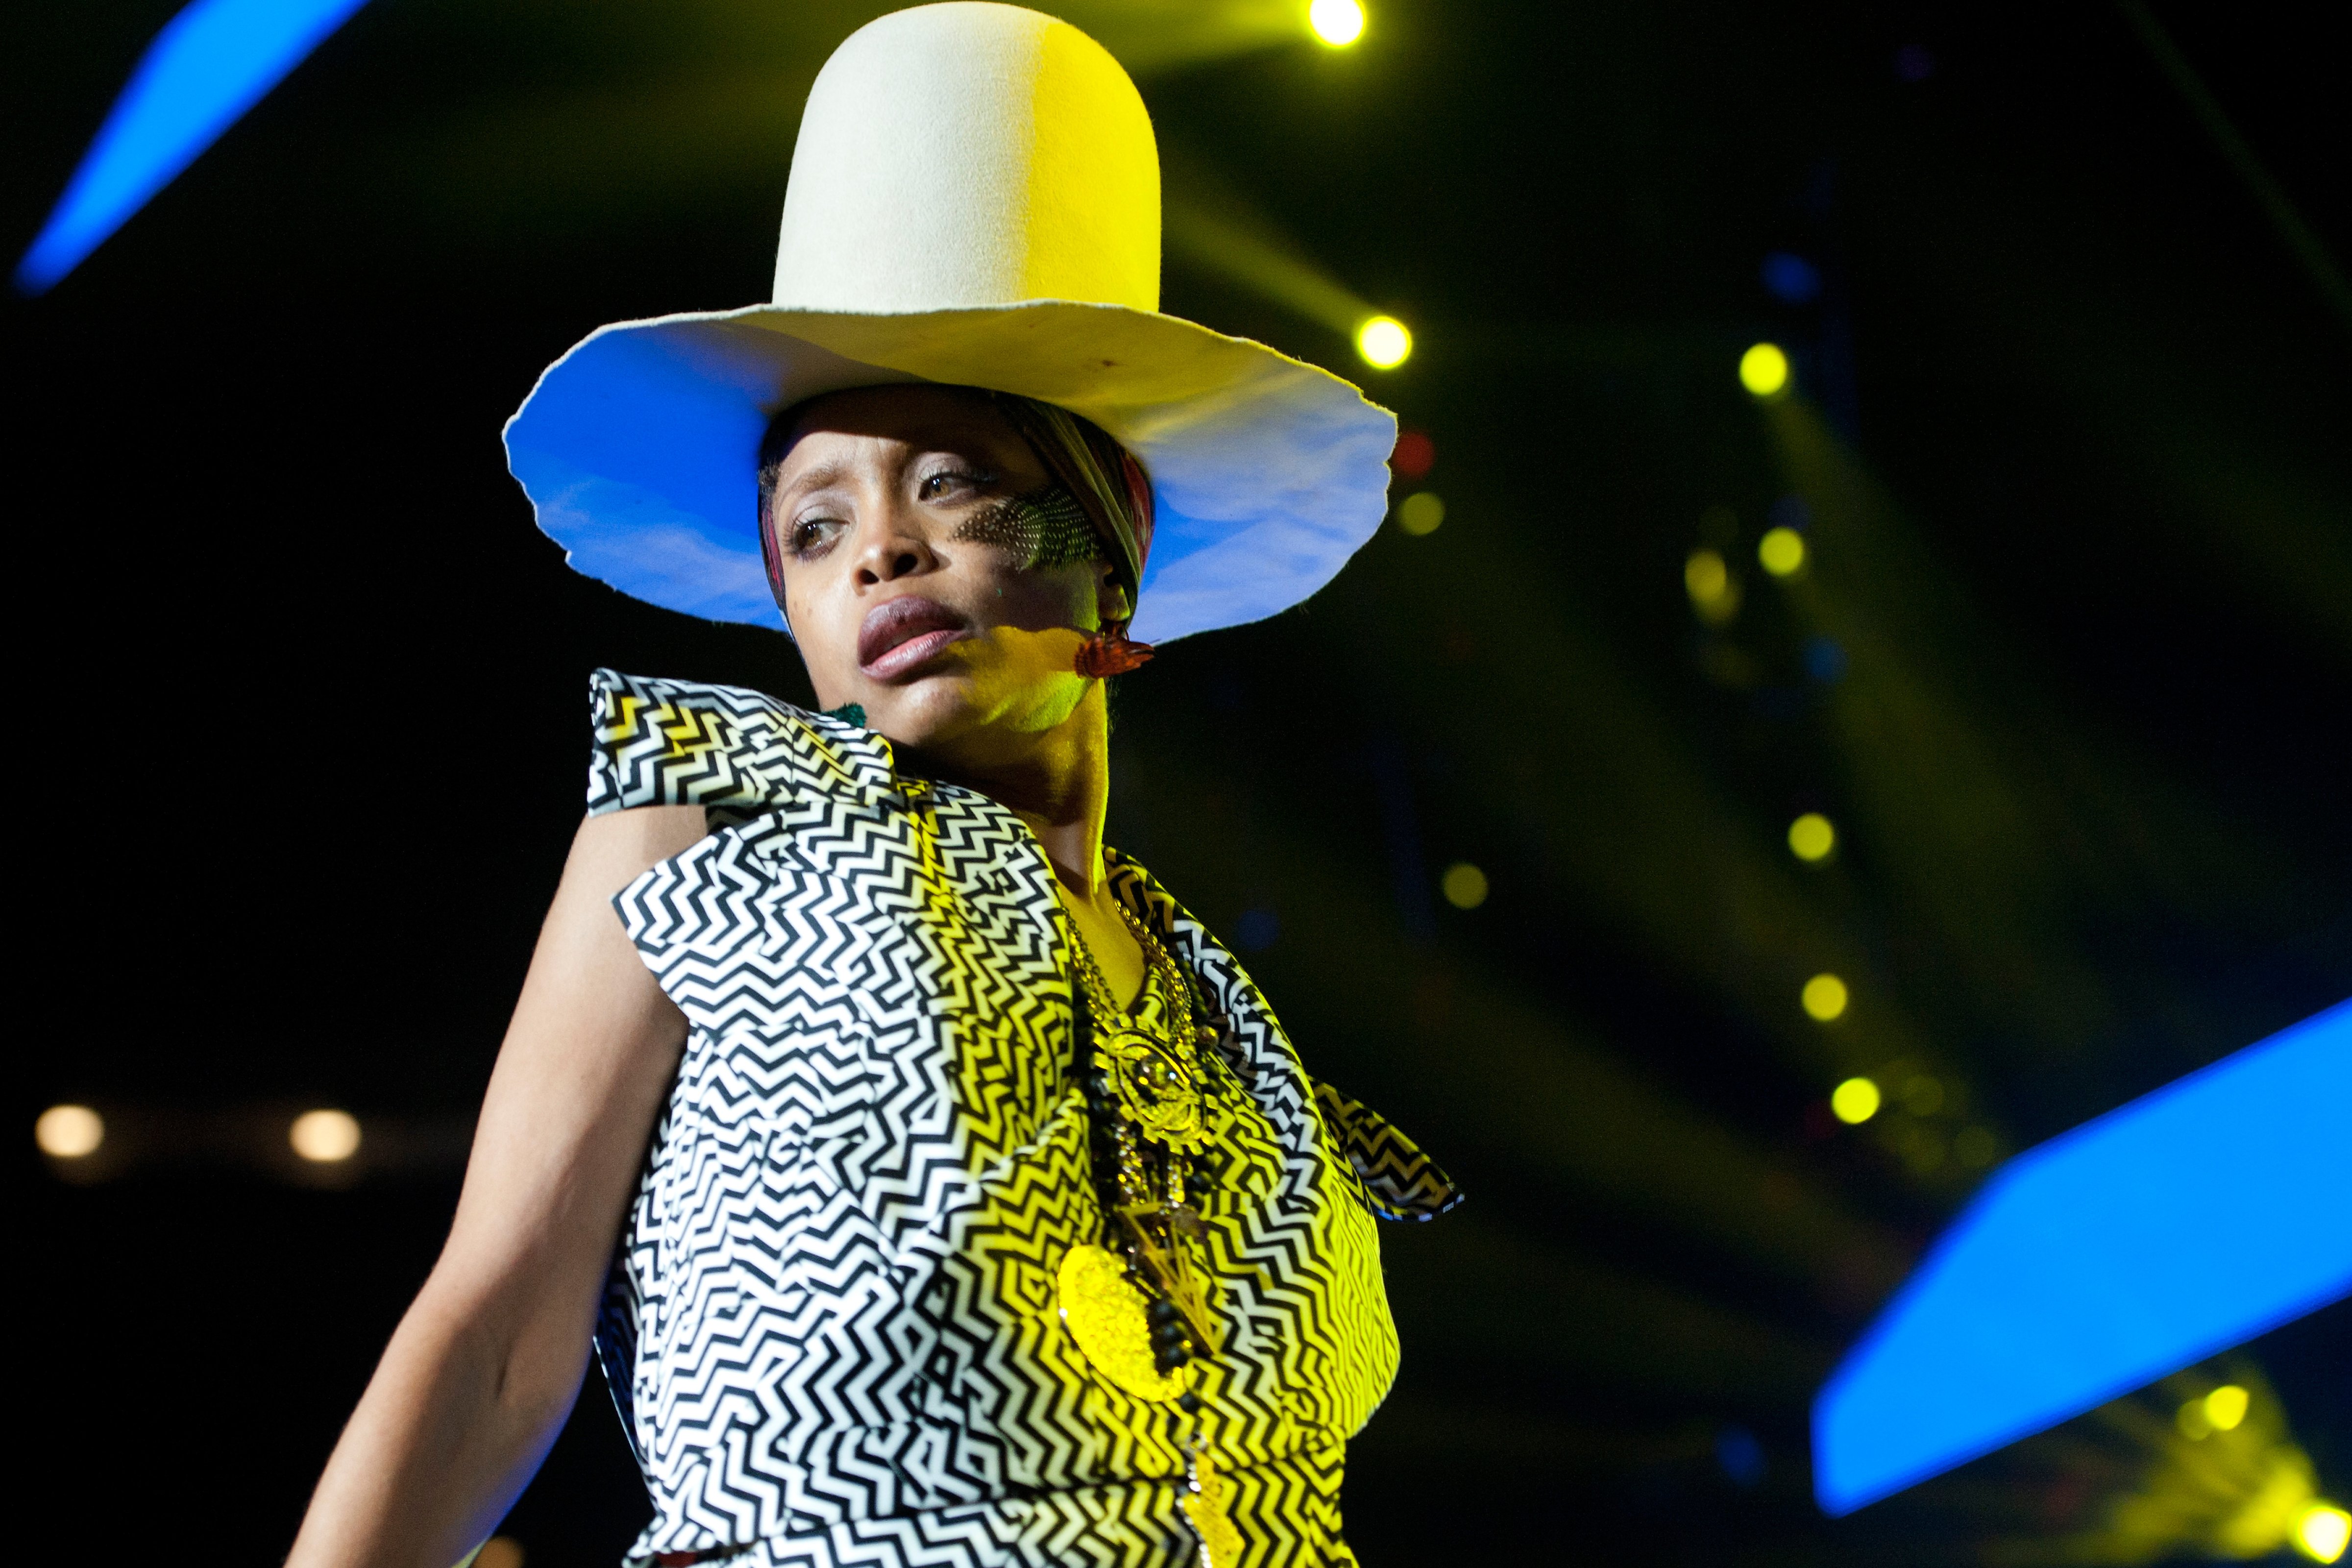 Erykah Badu performs during the 2014 Essence Music Festival on July 6, 2014 in New Orleans, Louisiana. (Erika Goldring—Getty Images)